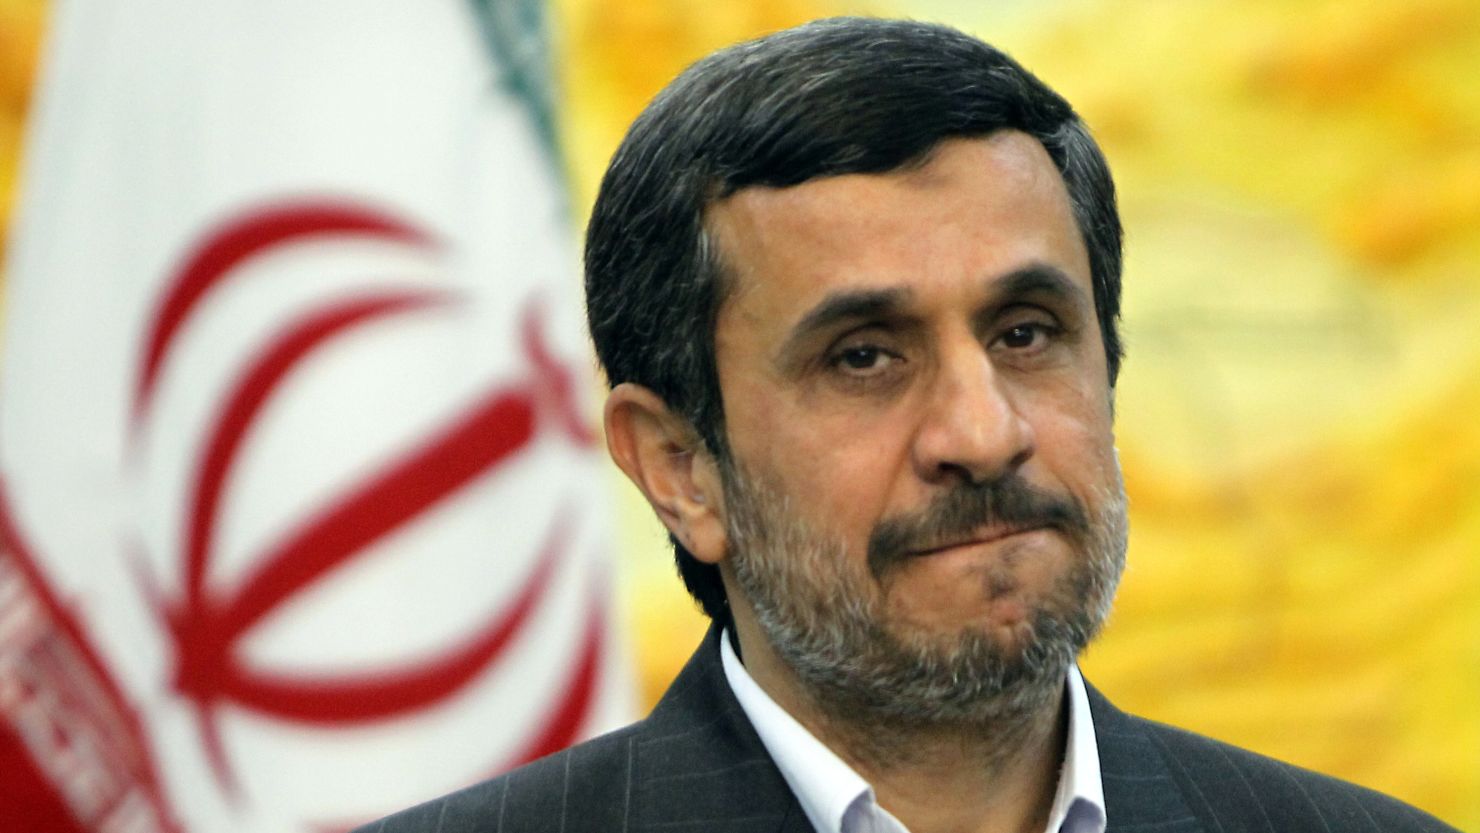 President Mahmoud Ahmadinejad's political opponents started attacking his views on Iran's Islamic dress code in 2010.